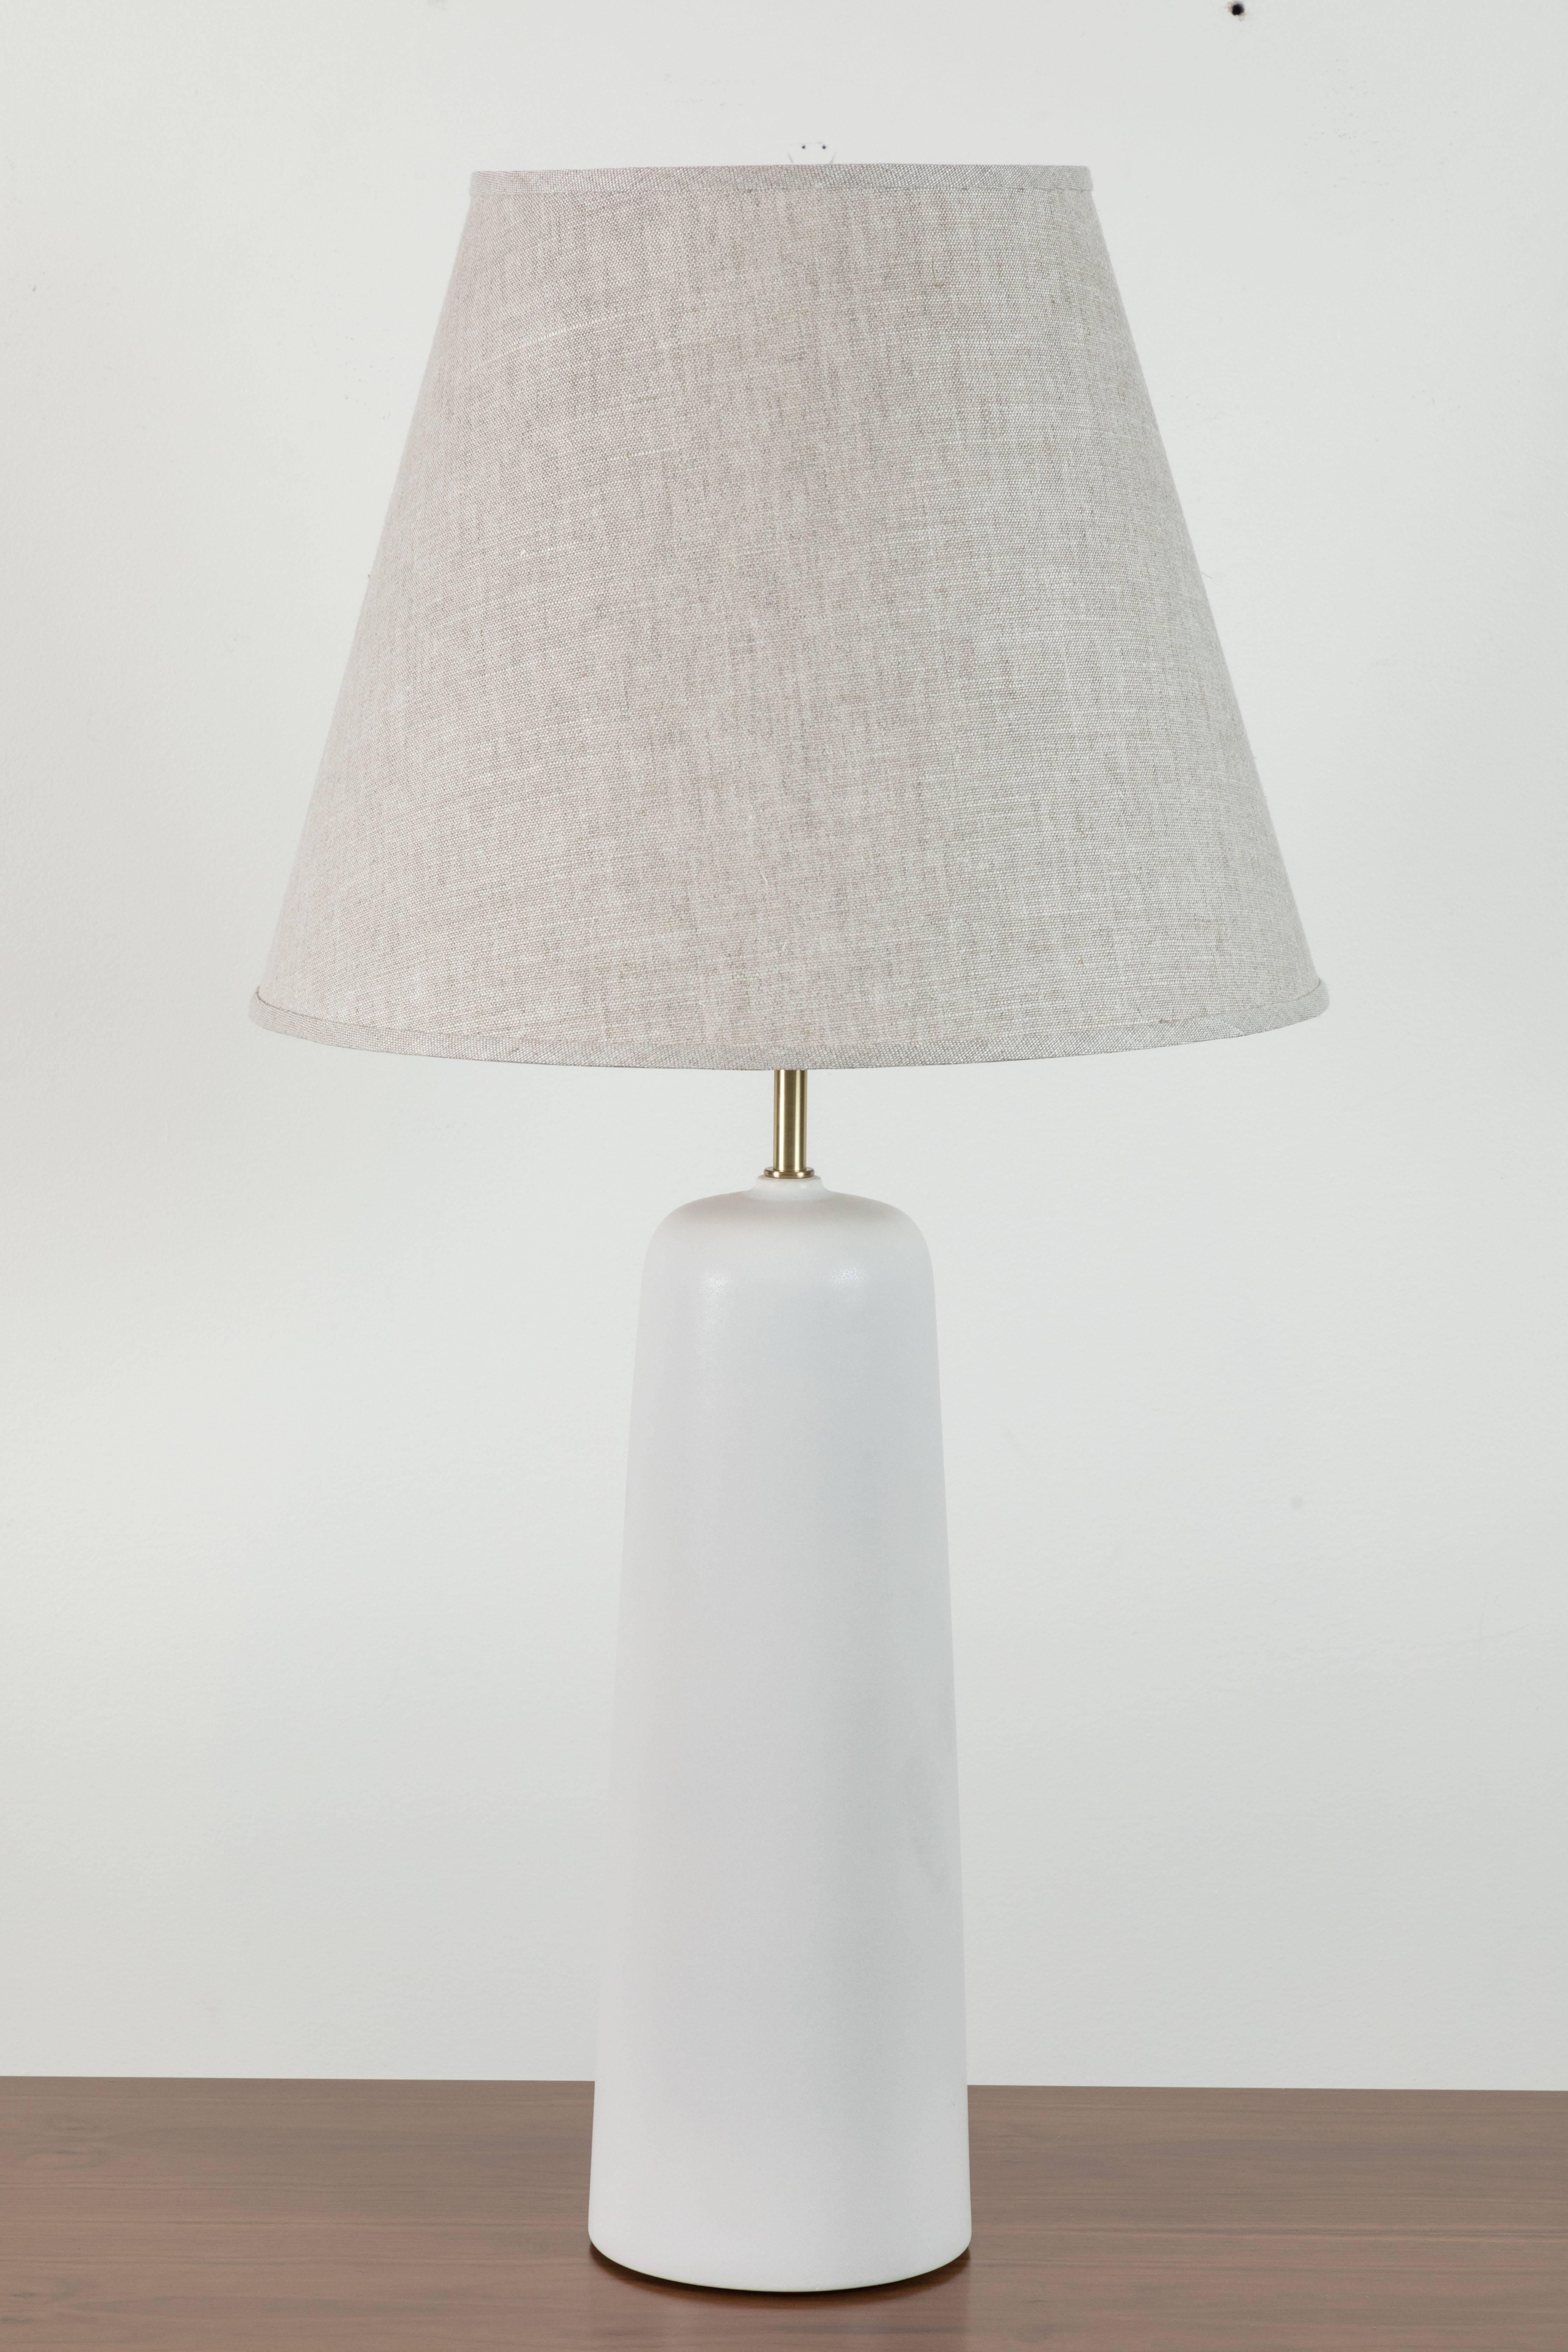 Pair of Bryce lamps by Stone and Sawyer for Lawson-Fenning